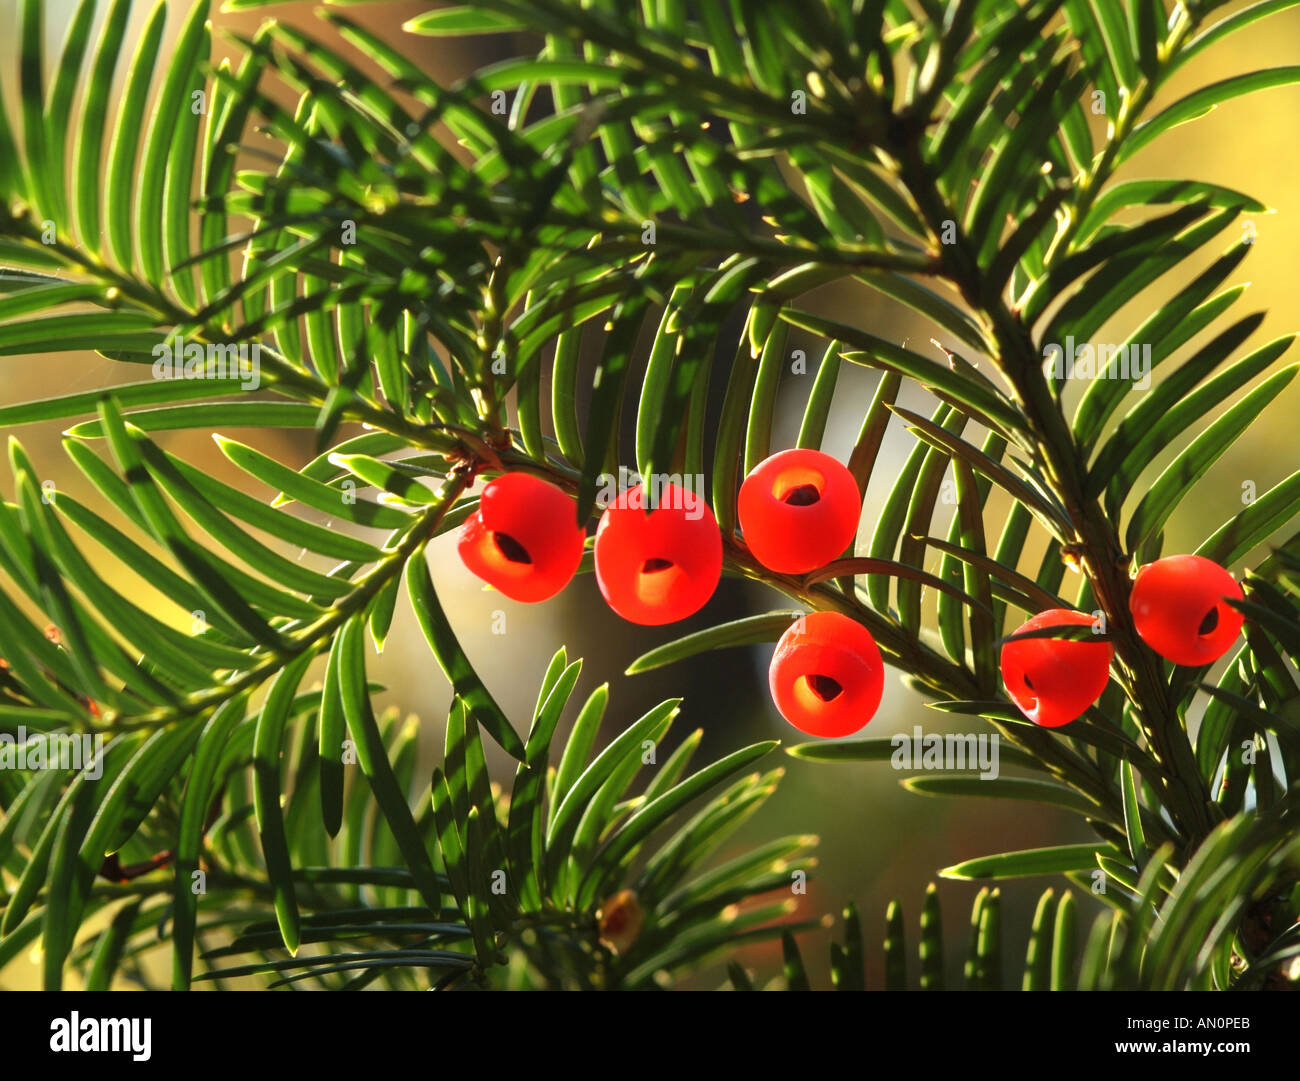 Yew tree red berries on the twig Taxus baccata Stock Photo